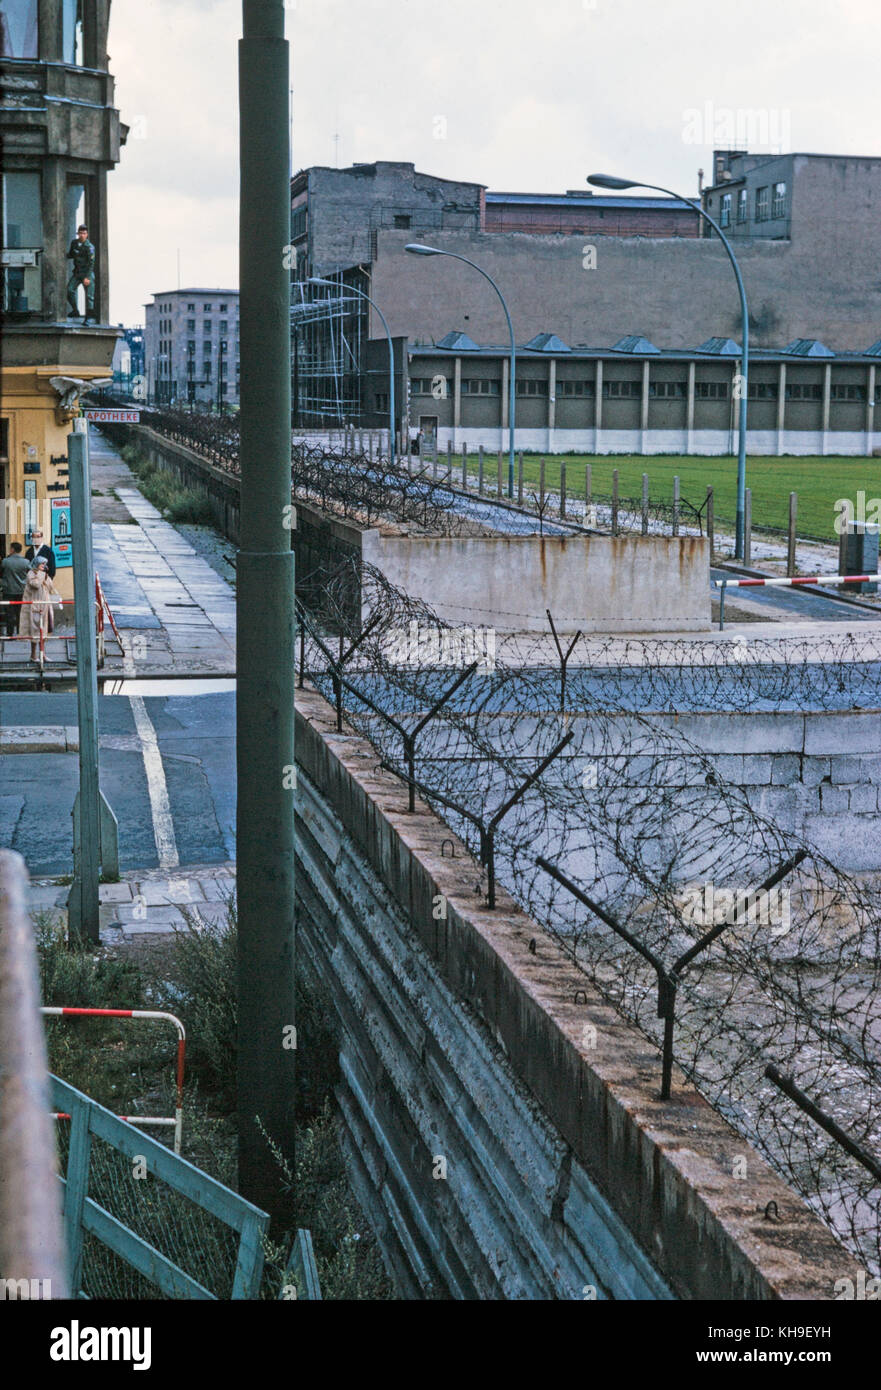 View looking across the Berlin Wall from West Germany in to East Germany in August 1965. The wall is covered in barbed wire and a female tourist is taking a photograph with a soldier appearing from an upstairs window of a nearby building. Stock Photo